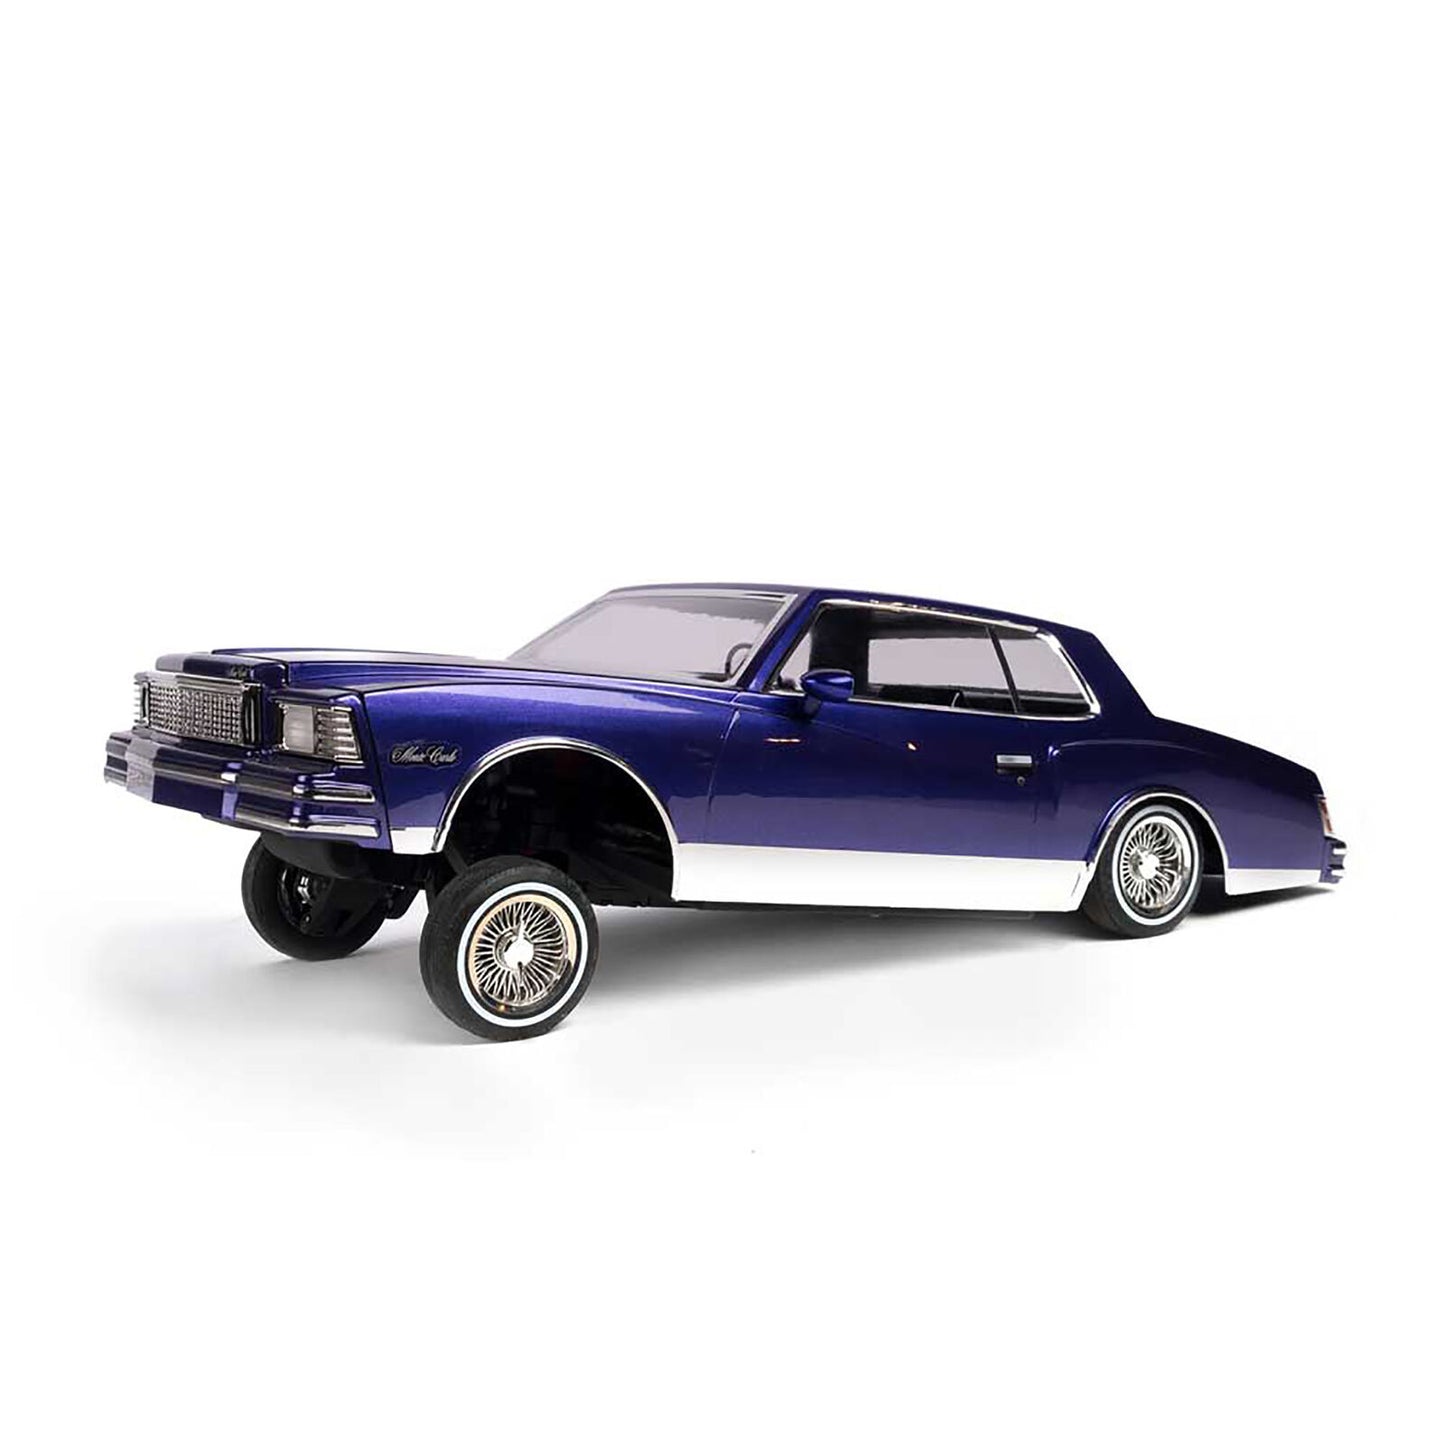 Redcat RER15155 1/10 1979 Chevrolet Monte Carlo Brushed 2WD Lowrider RTR, Purple